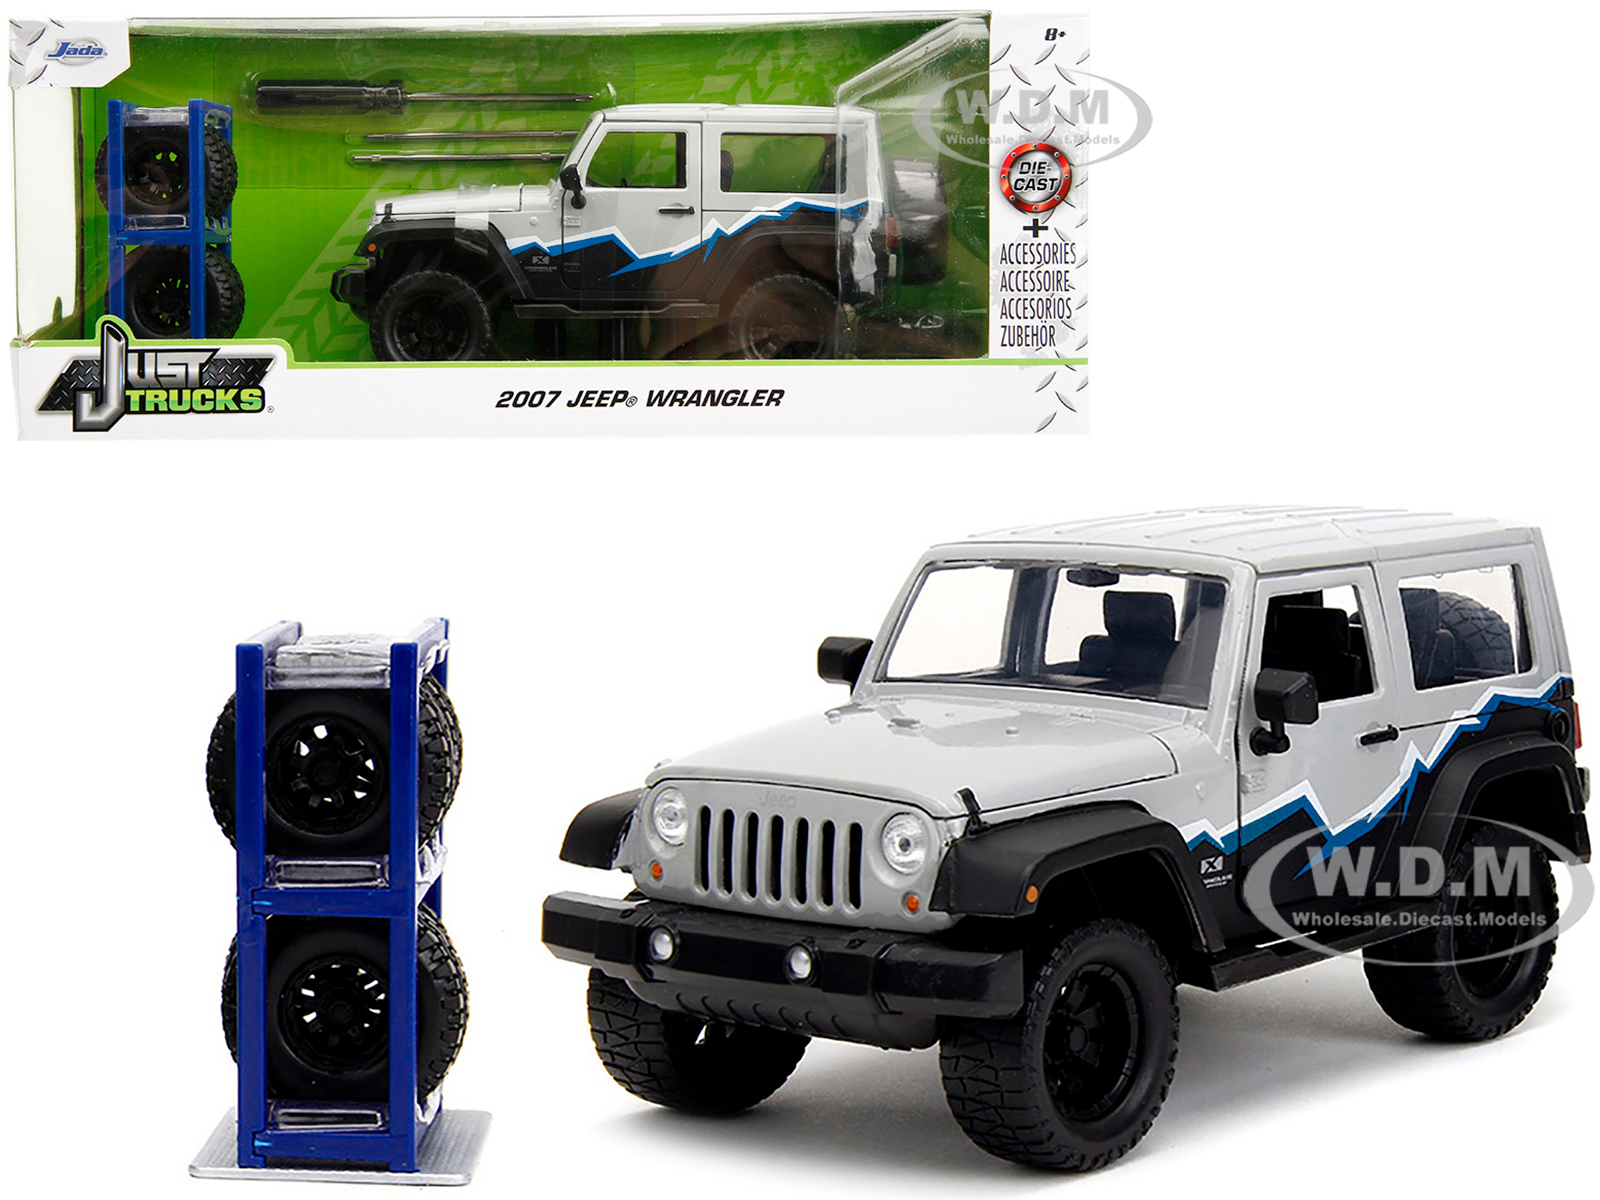 2007 Jeep Wrangler Gray and Black with Blue and White Stripes with Extra Wheels "Just Trucks" Series 1/24 Diecast Model Car by Jada